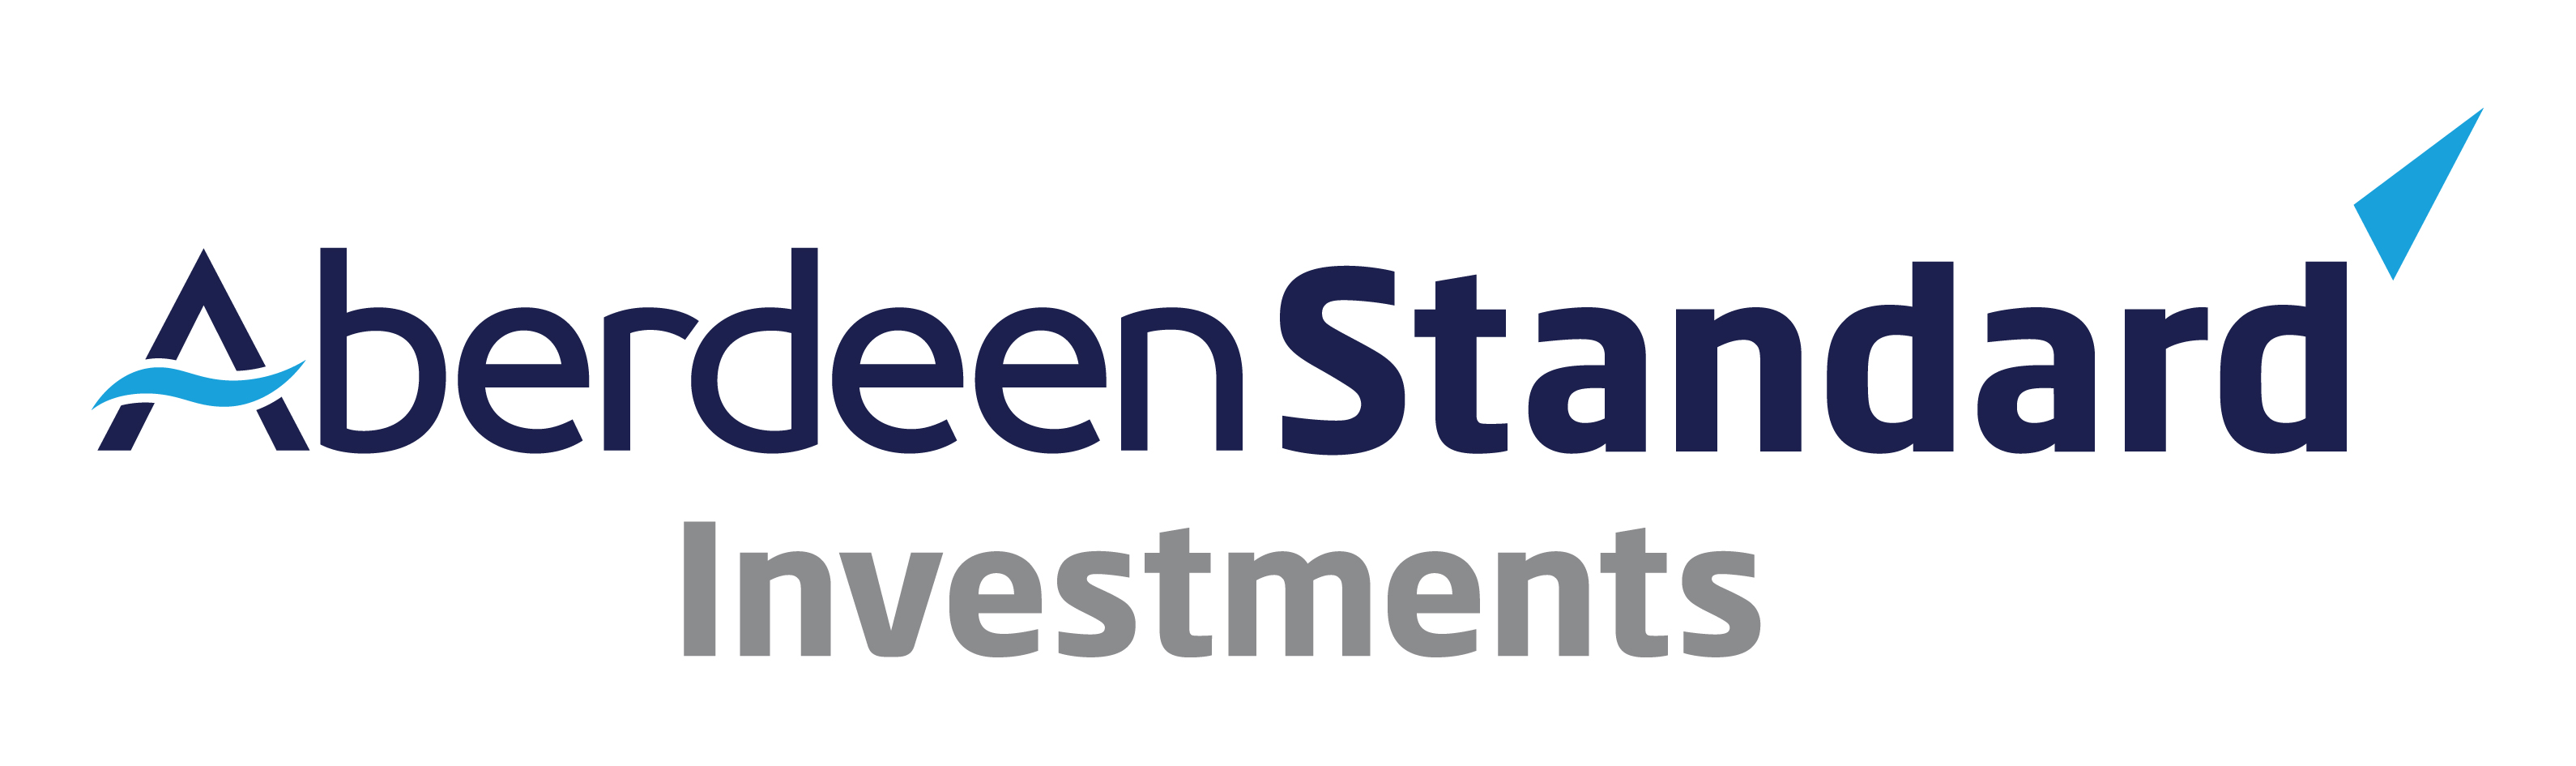 Aberdeen Standard Investments Inc., Monday, August 23, 2021, Press release picture